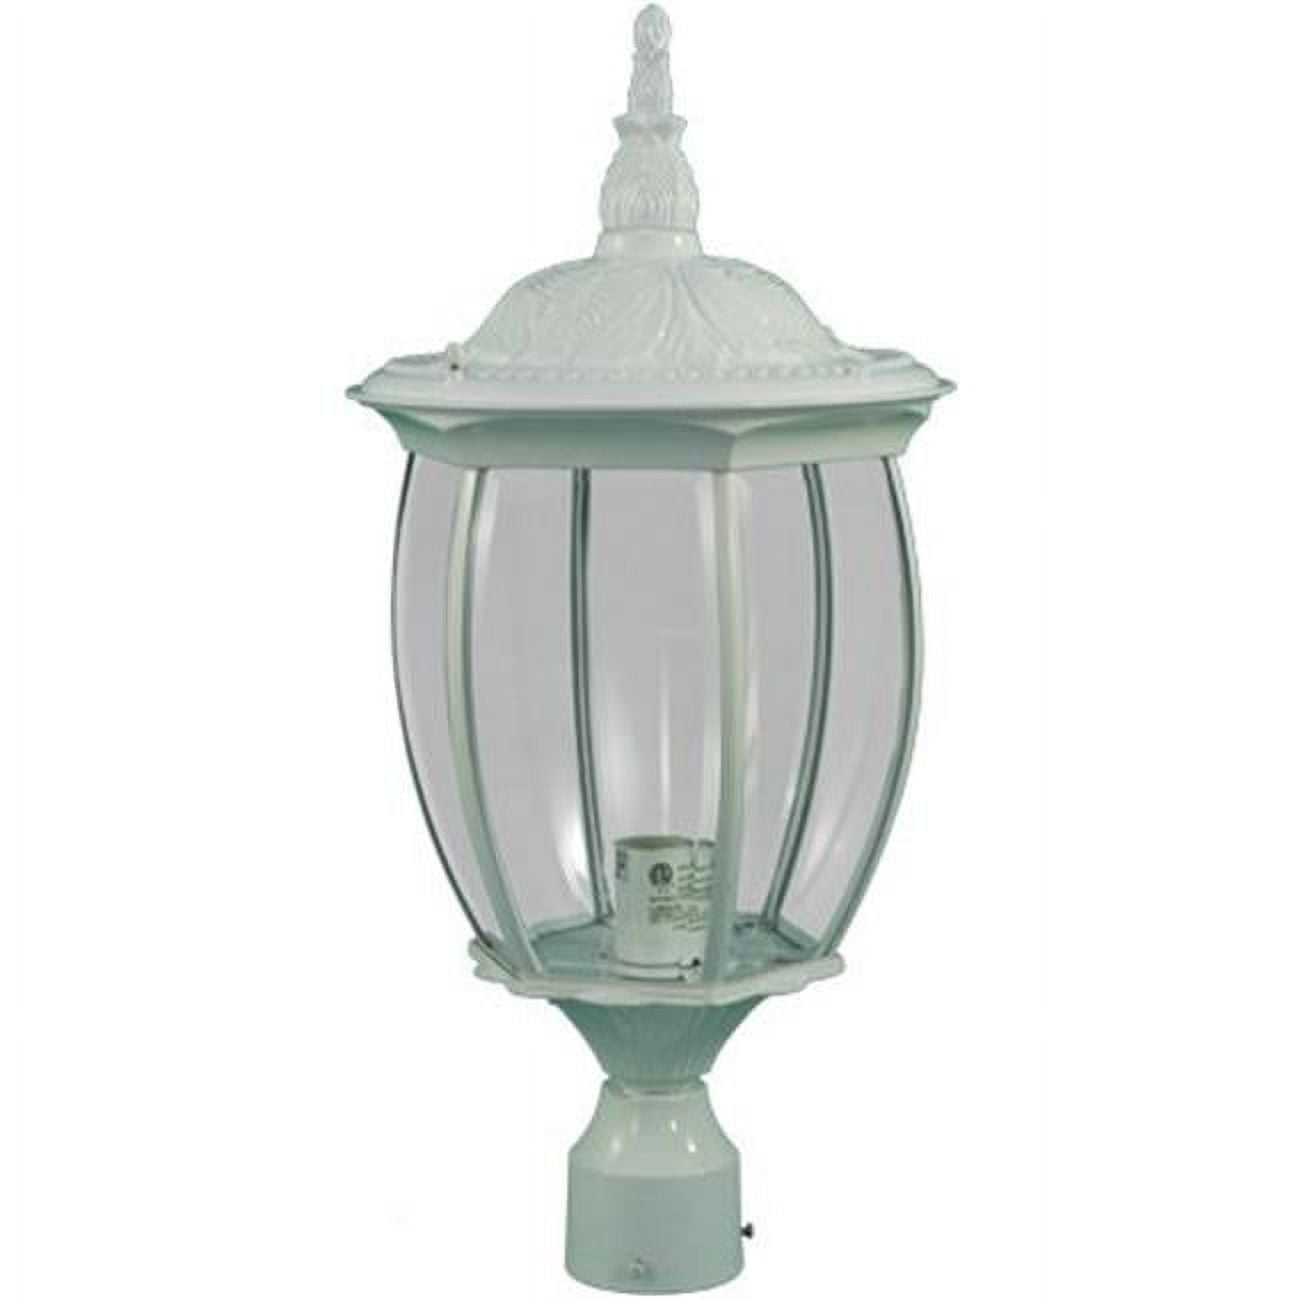 Picture of Dabmar Lighting GM102-W Powder Coated Cast Aluminum Post Top Light Fixture, White - 23.38 x 11.13 x 11.13 in.